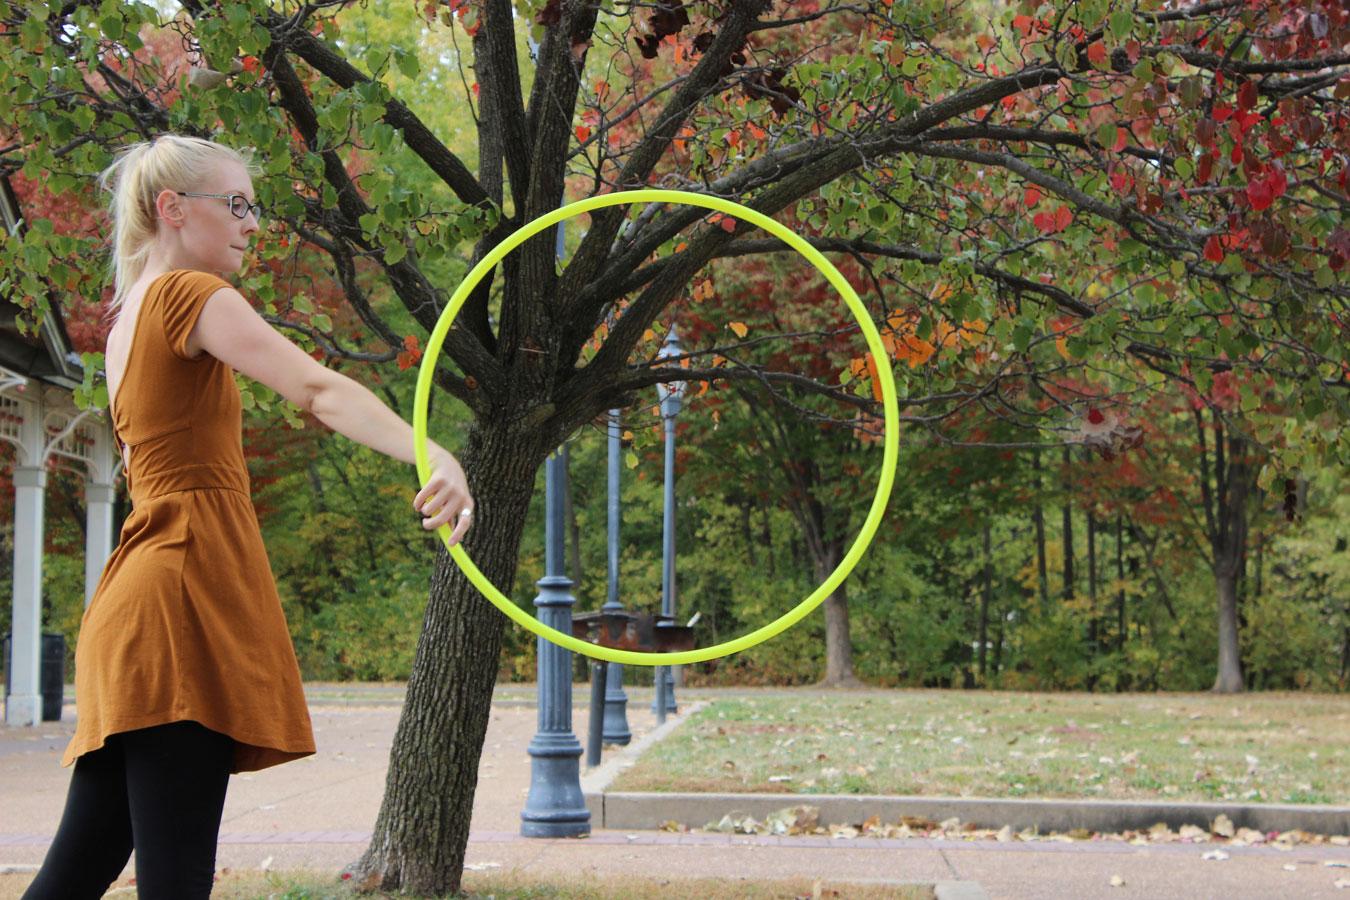 Lizzie Fletcher does the iso pop trick with one of her polypro hula hoops on Oct. 24 at Main Street St.Charles. There are many tricks in hoop dancing including some easier ones: isolation, vortex, etc.